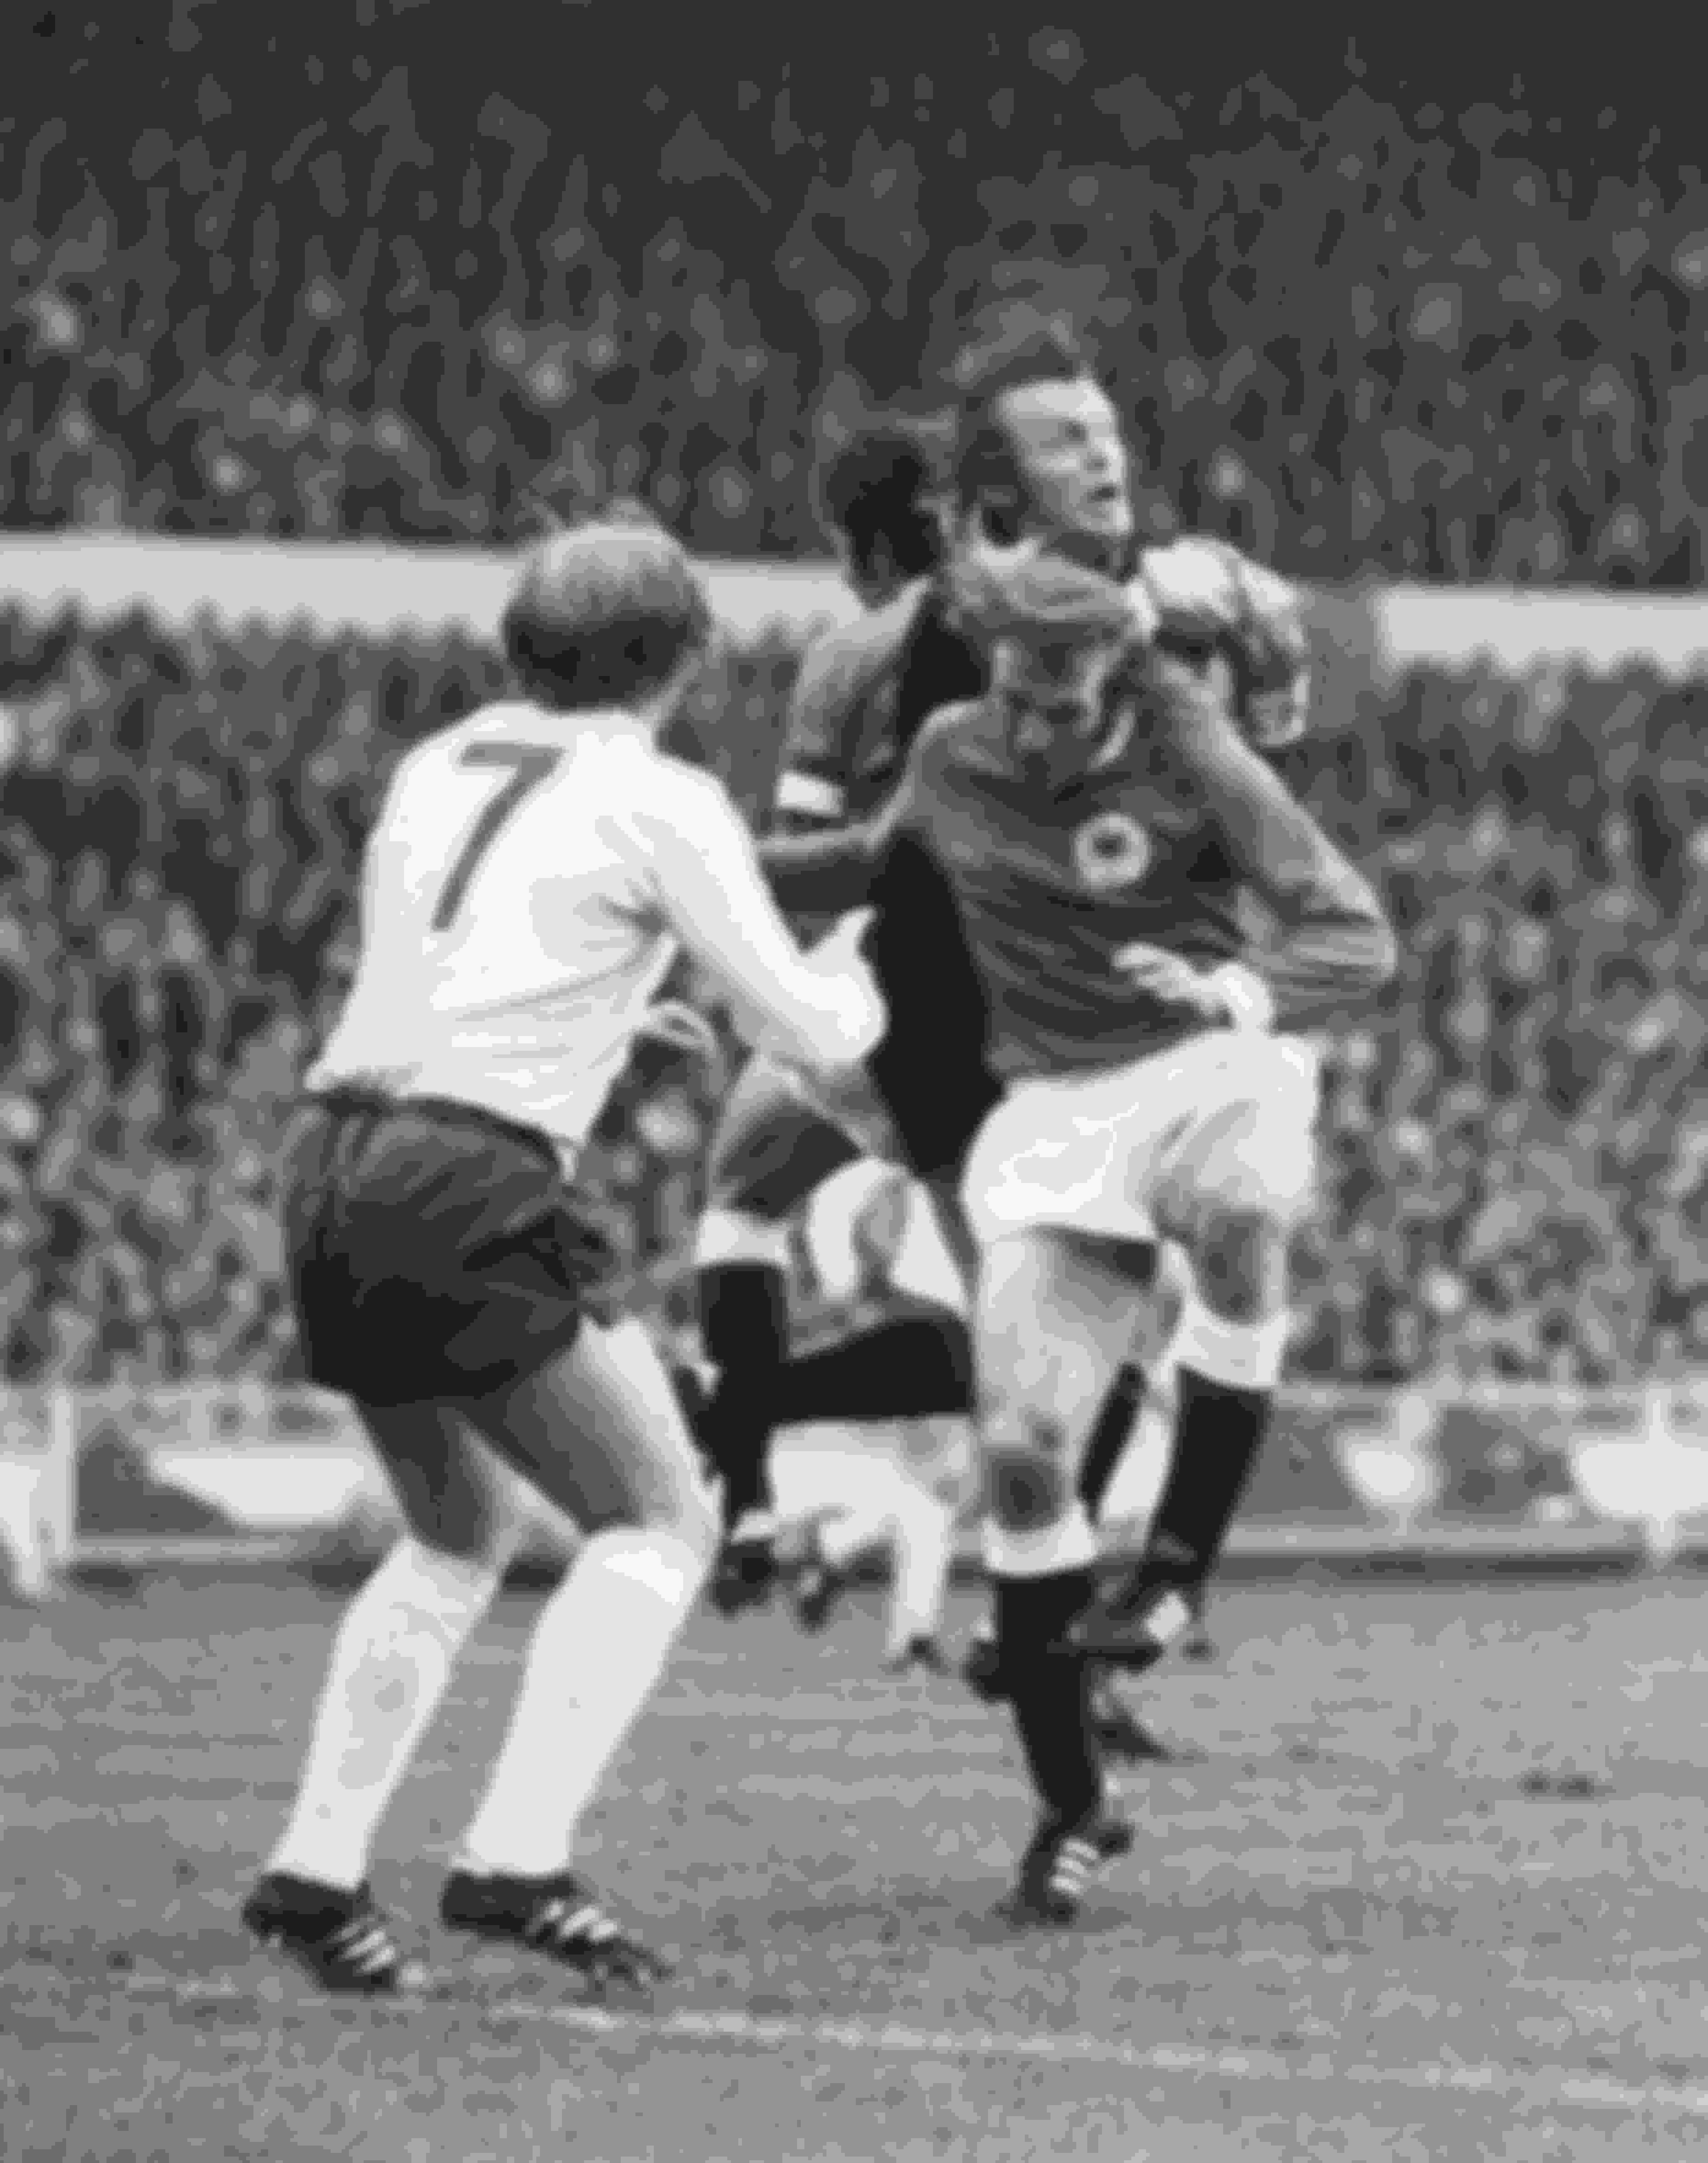 West Germany beat England in the quarter-final of the 1972 European Championship.